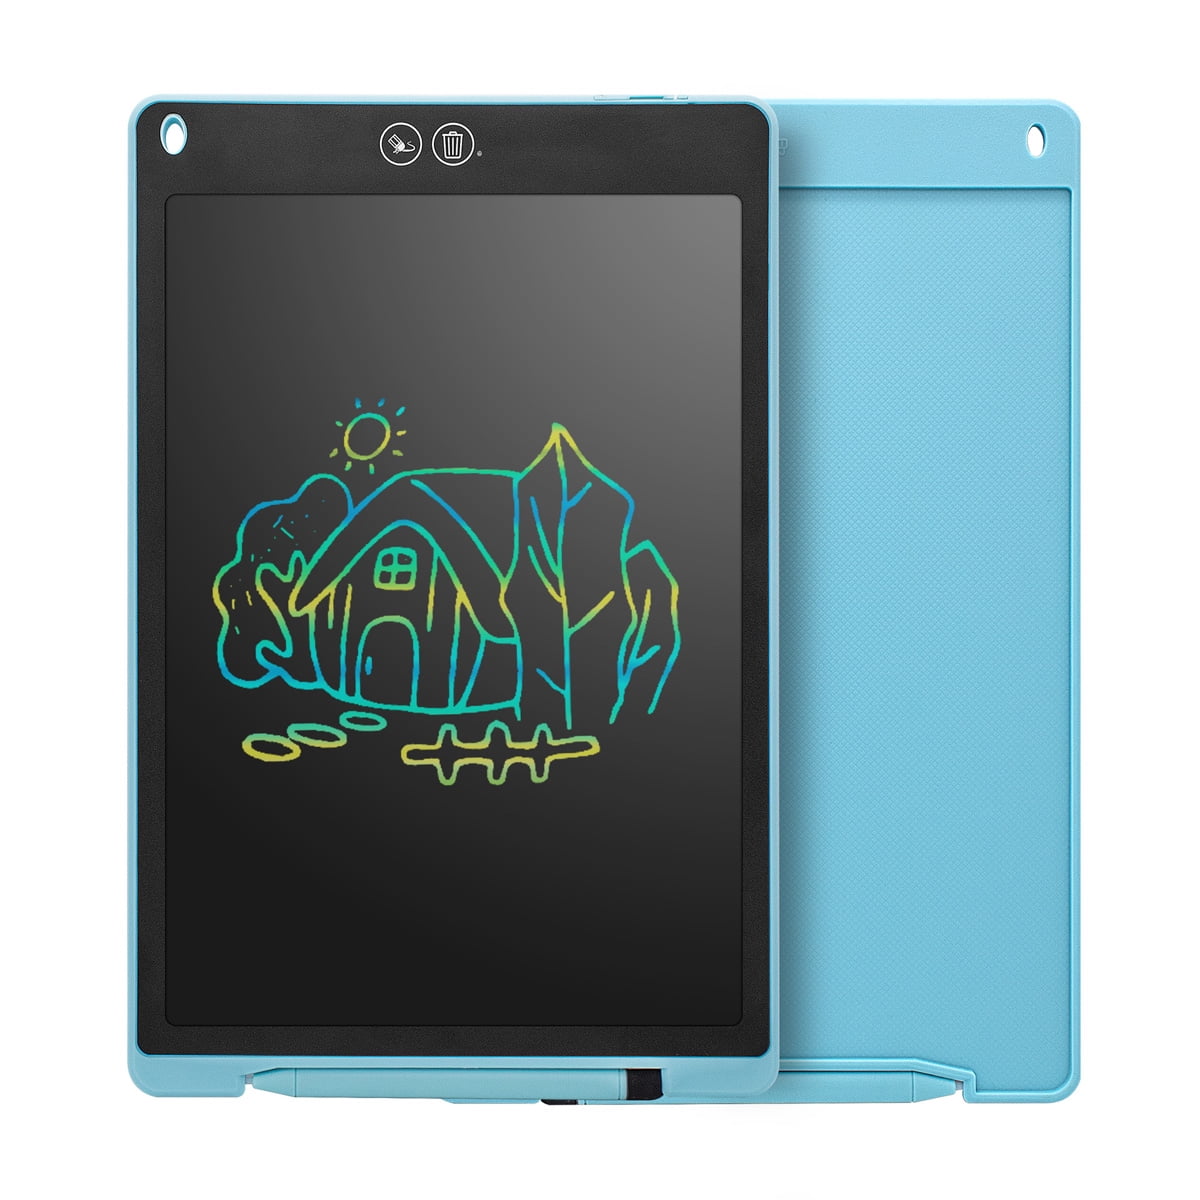 Kids Color Drawing pad 10inch LCD Writing Tablet with Colouful Handwriting Doodle Board with Stylus and Digital Screen Lock,Fun Create Customize Orange colouful Ideal Home School, 